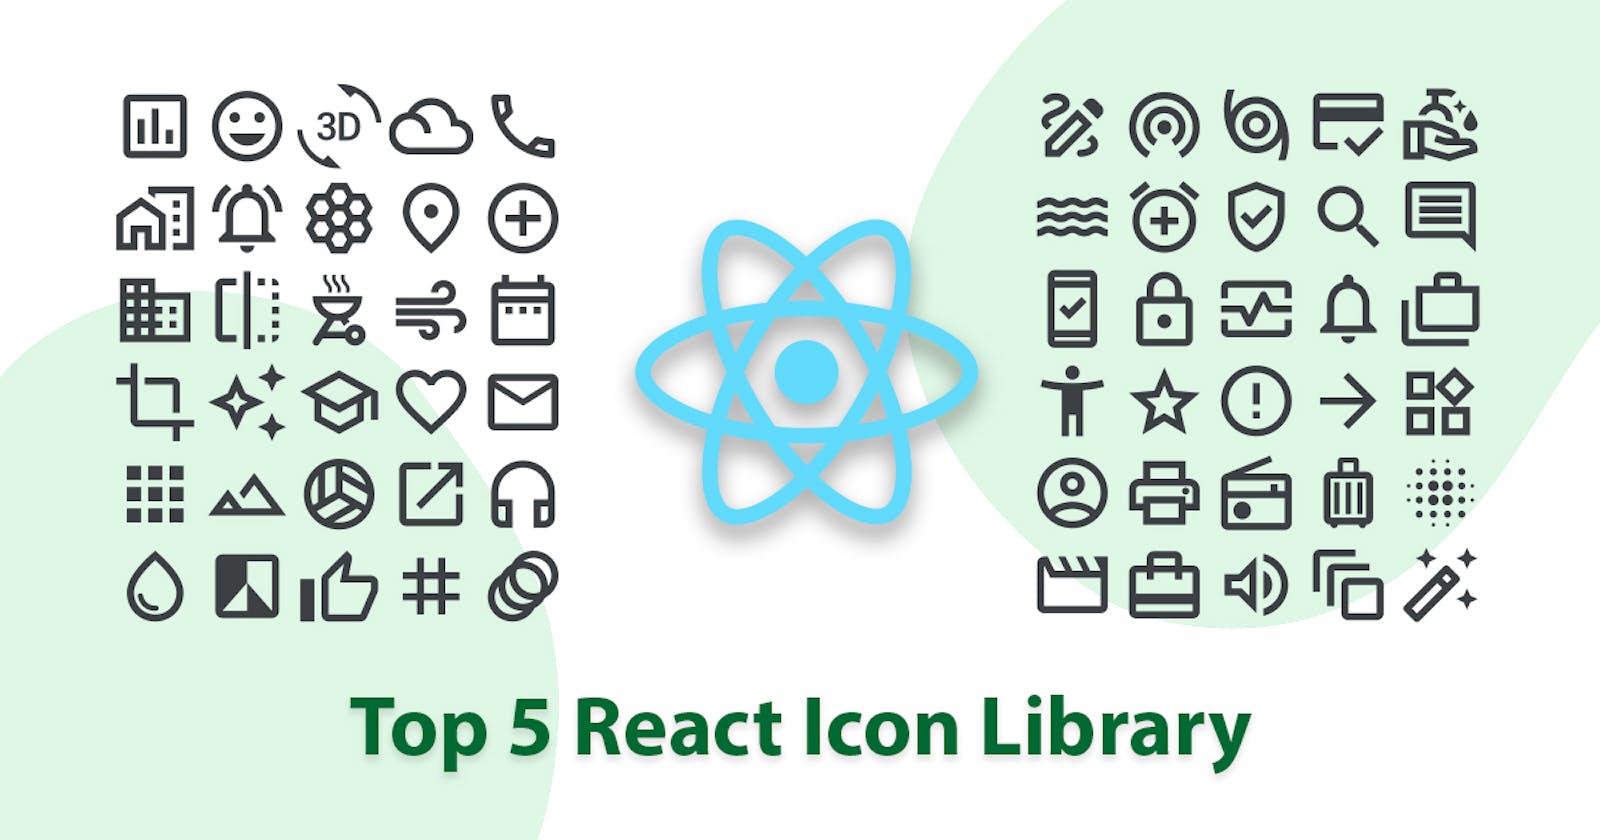 Top 5 React Icon Library to Enhance Your Web App